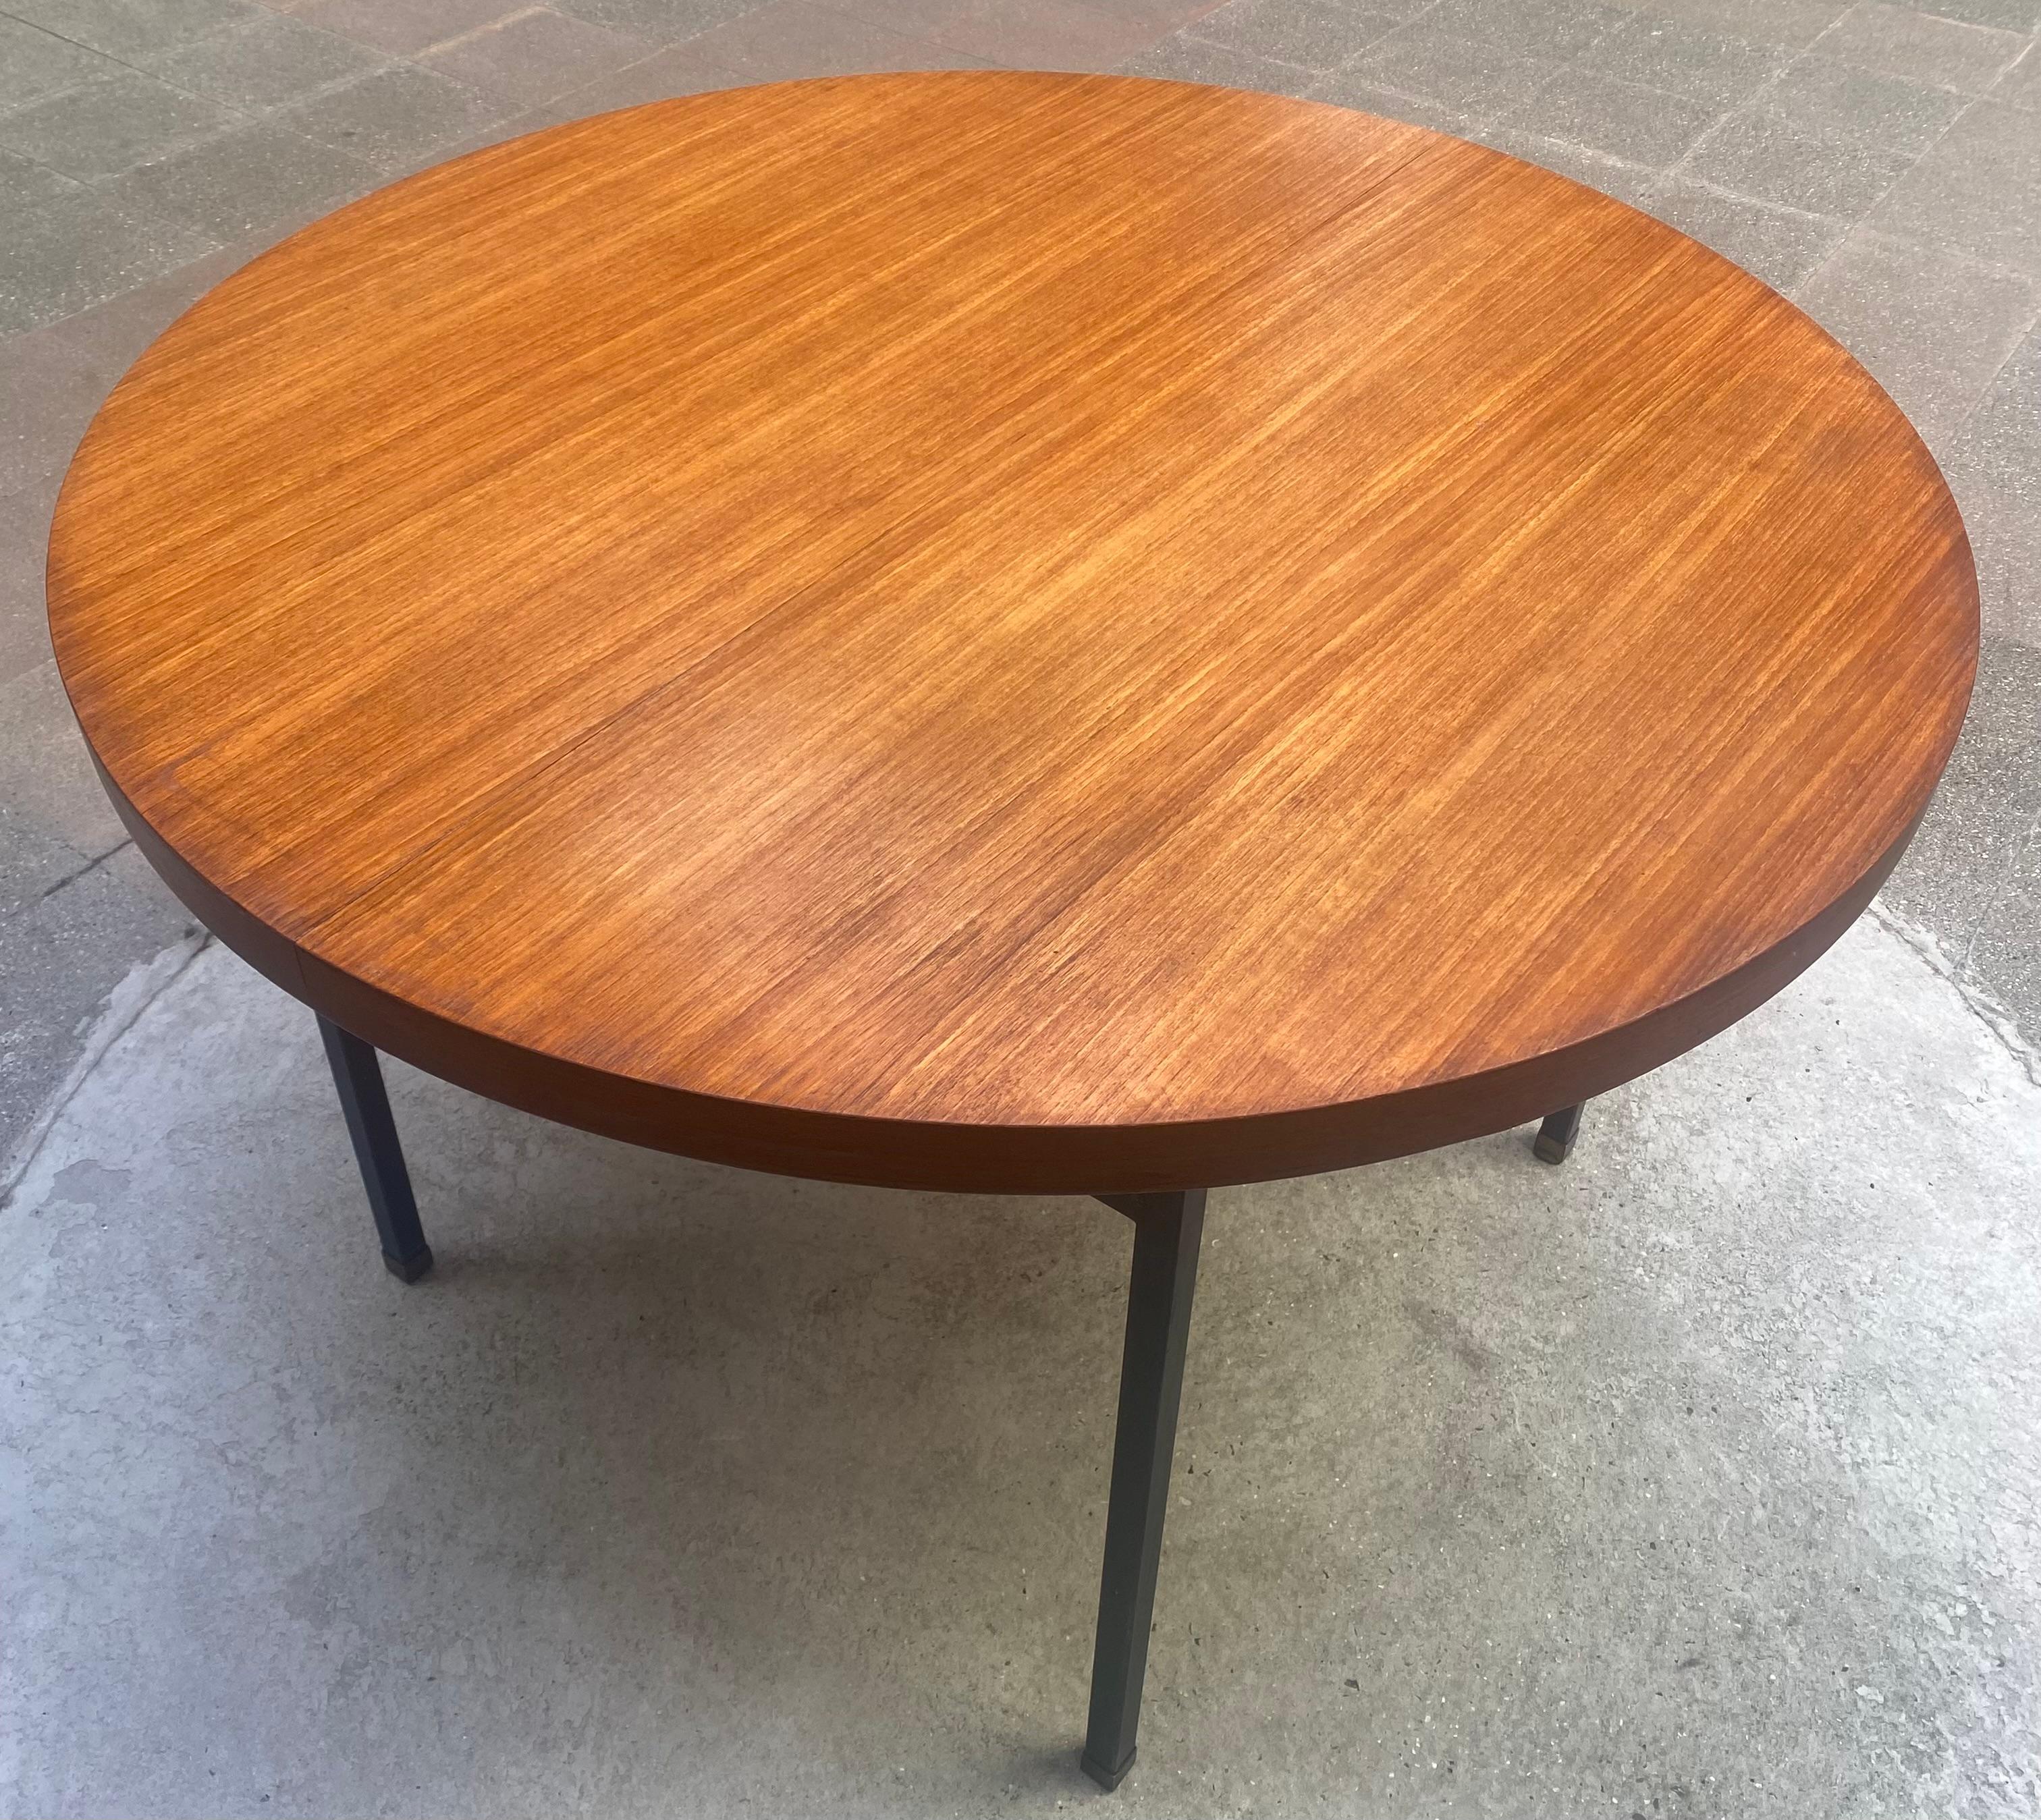 Pierre Guariche dining table. 
Minvielle Edition. 
Materials: Teak and steel.
circa 1960.
Stamped
Dimensions open : L 162 x W110 x H 73 cm.
Dimensions closed : Ø110 x 73 cm.
Blackened steel, steel and brass legs. 
Price : 1100€ for the